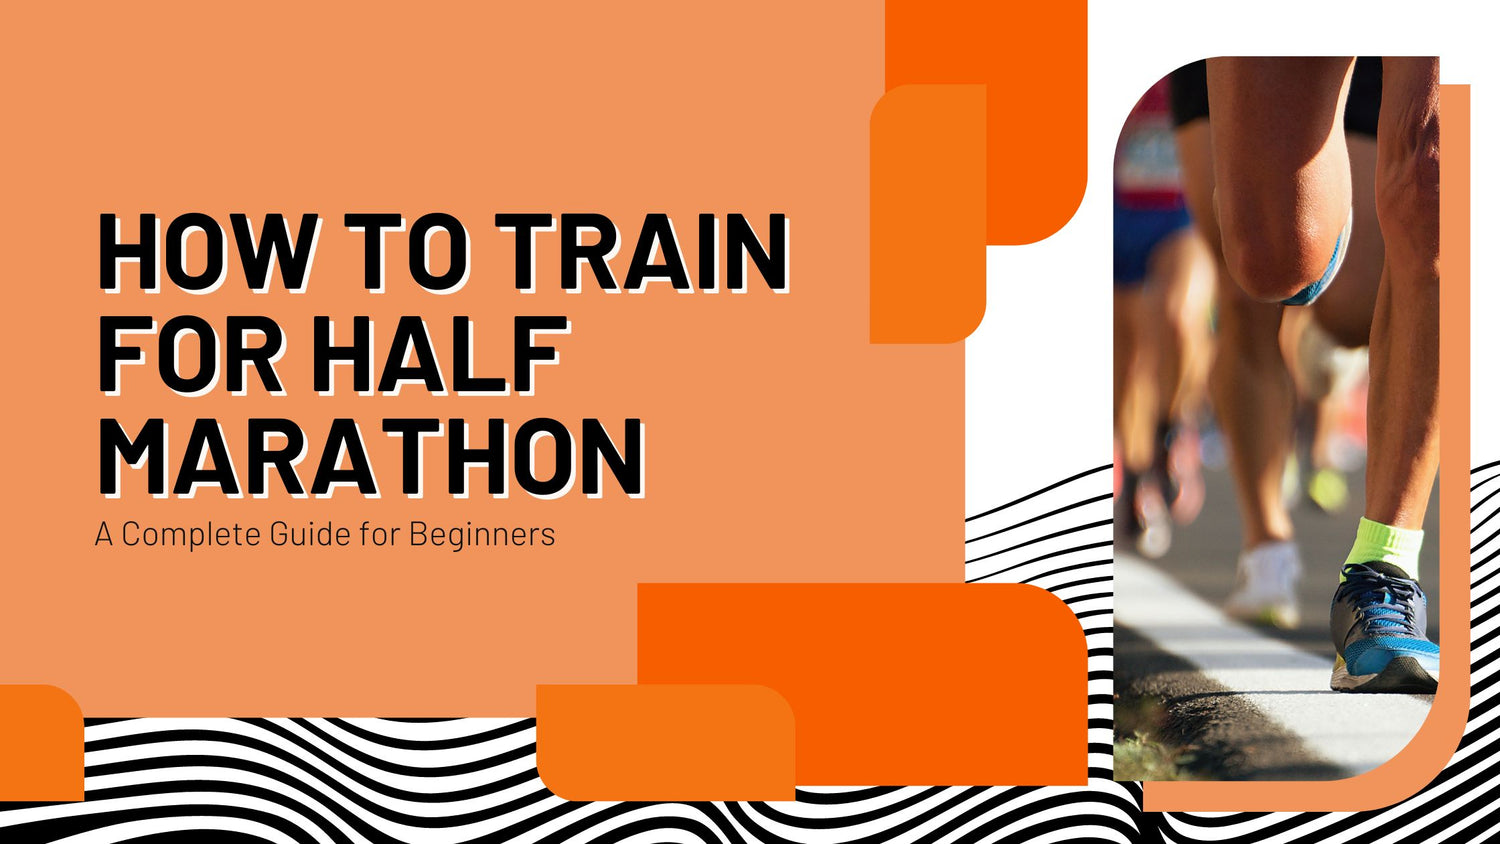 How to Train for Half Marathon as a Beginner - The Complete Guide